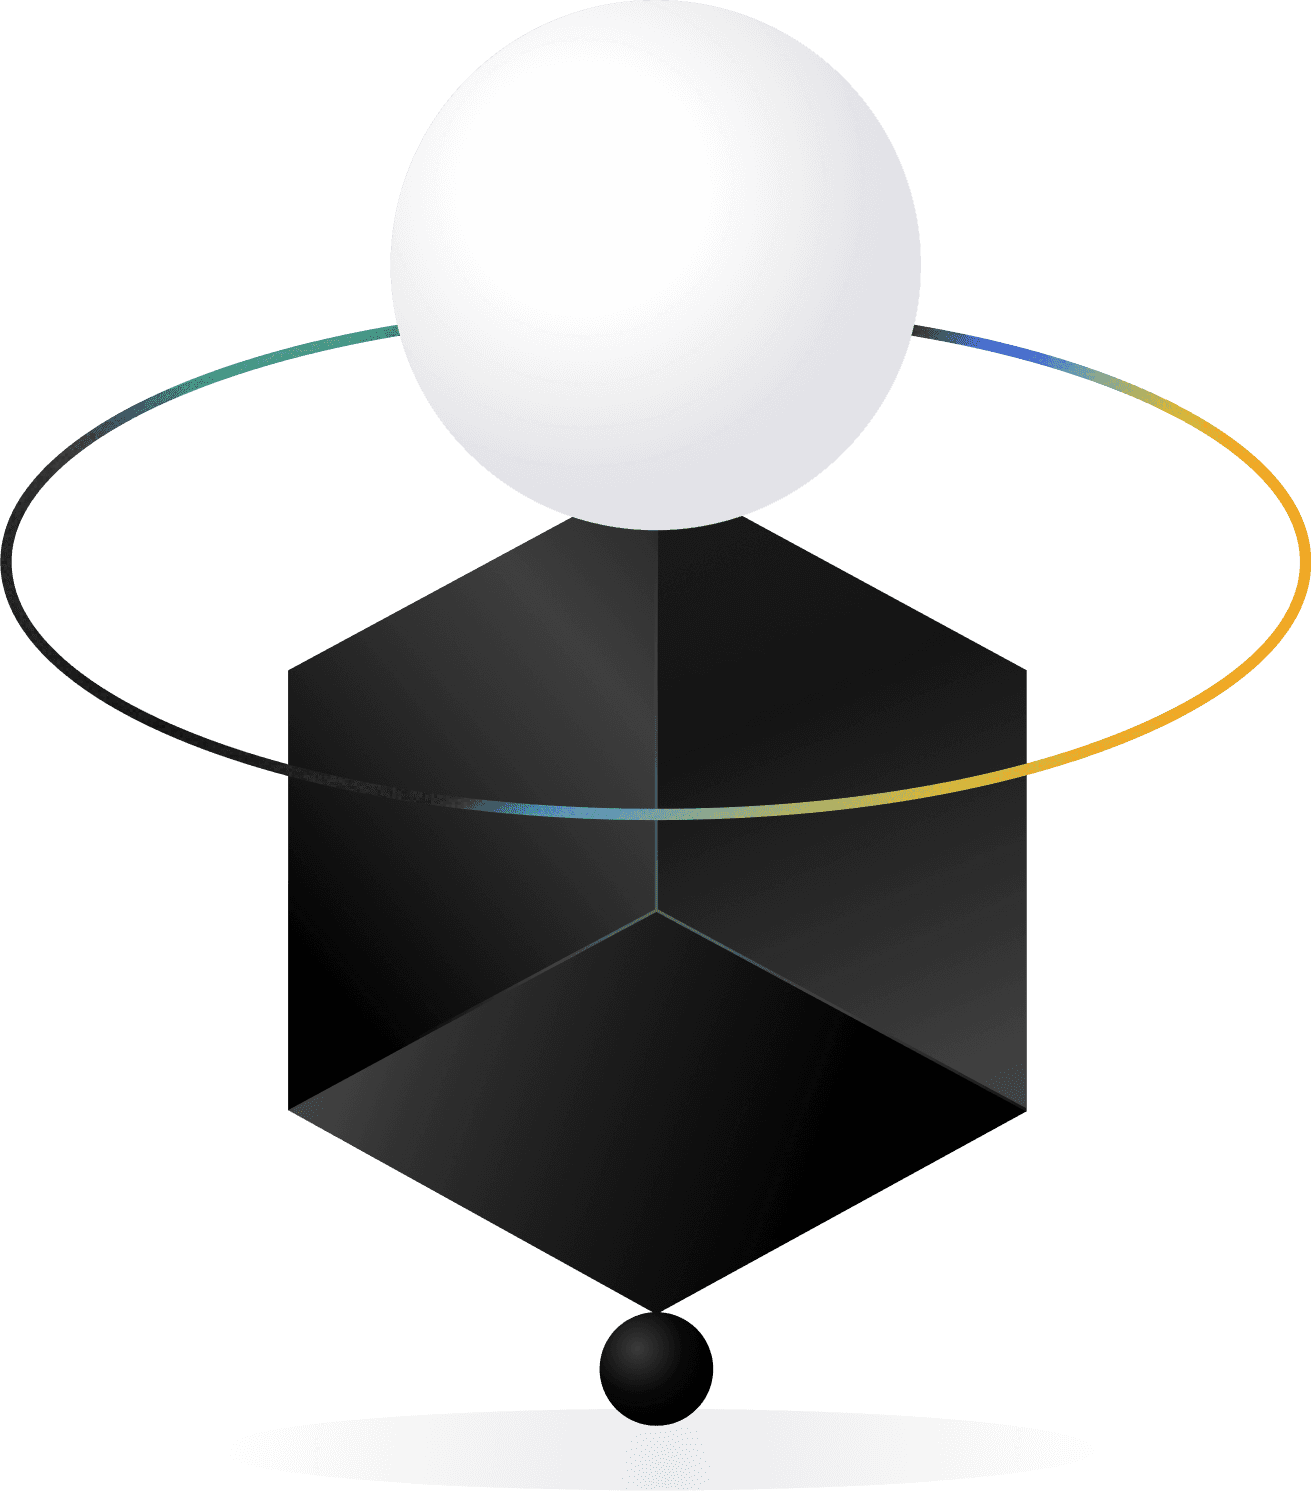 Abstract graphic with dark cube and light sphere to break up a UX case study.